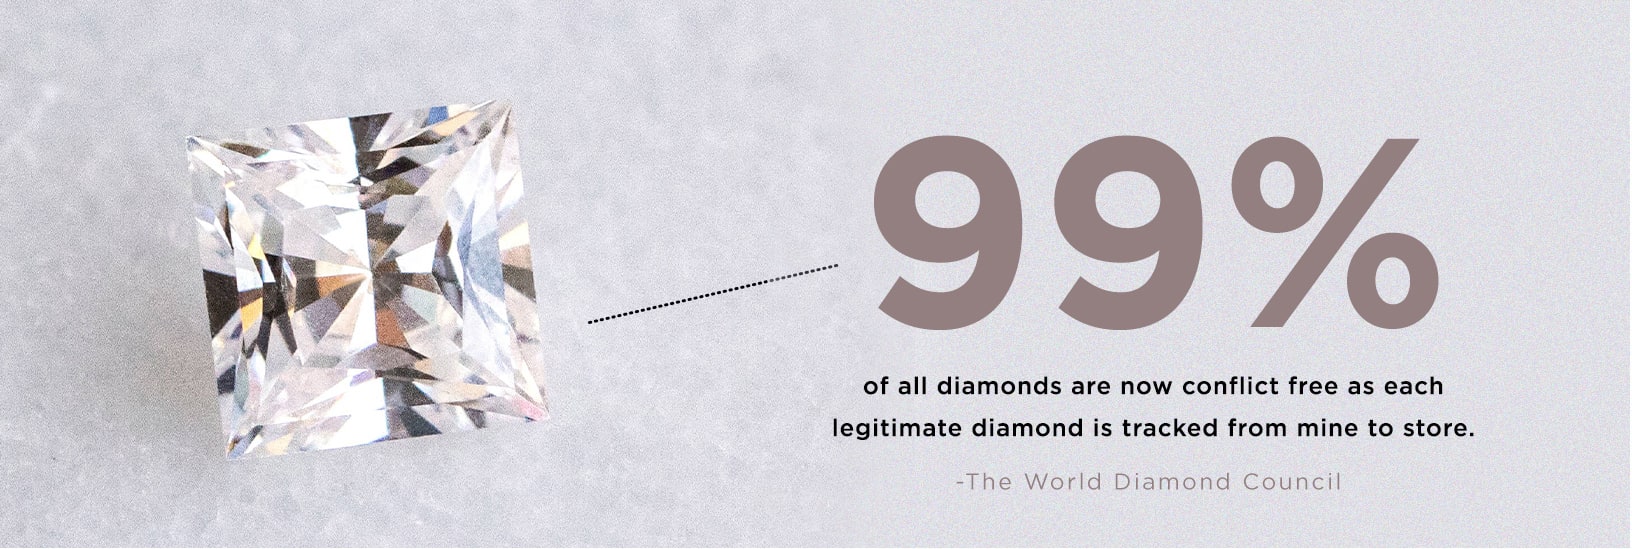 Many of today's diamonds are conflict free